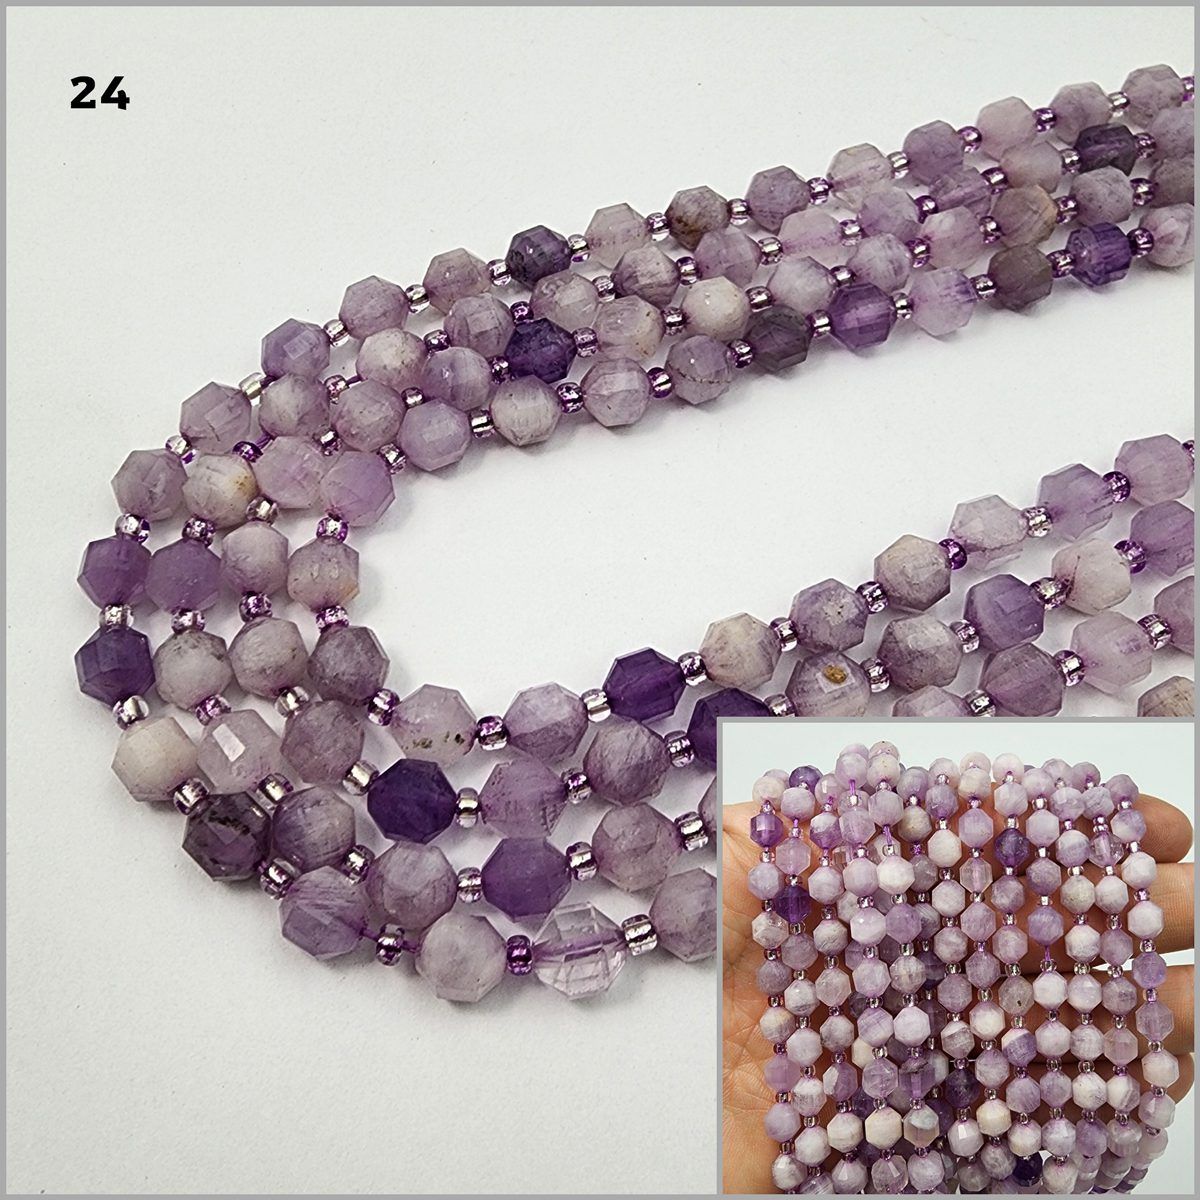 SALE Natural Faceted Gemstone Beads Star Cut Gemstone Spacer for Bracelet  Necklace DIY Jewelry Making, Natural Chakra Beads GRN265